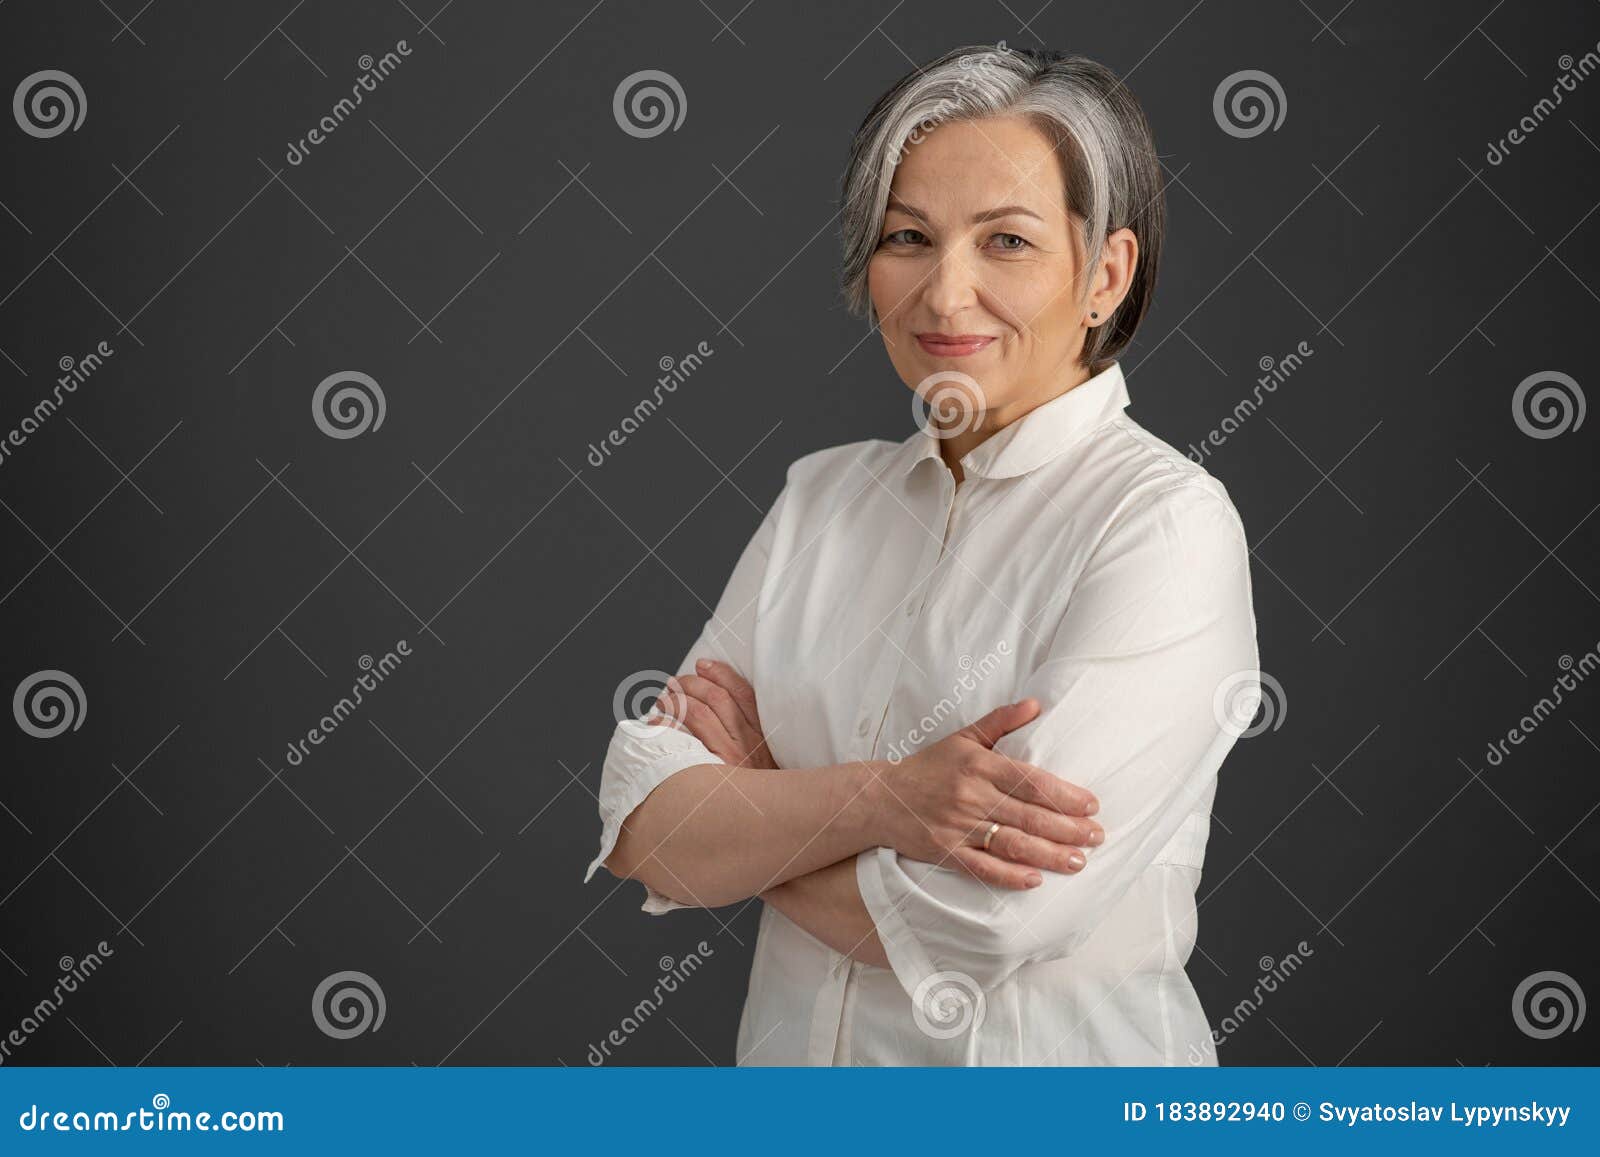 intelligent silver-haired woman smiles with arms crossed. pretty business woman looking at camera confidently. 